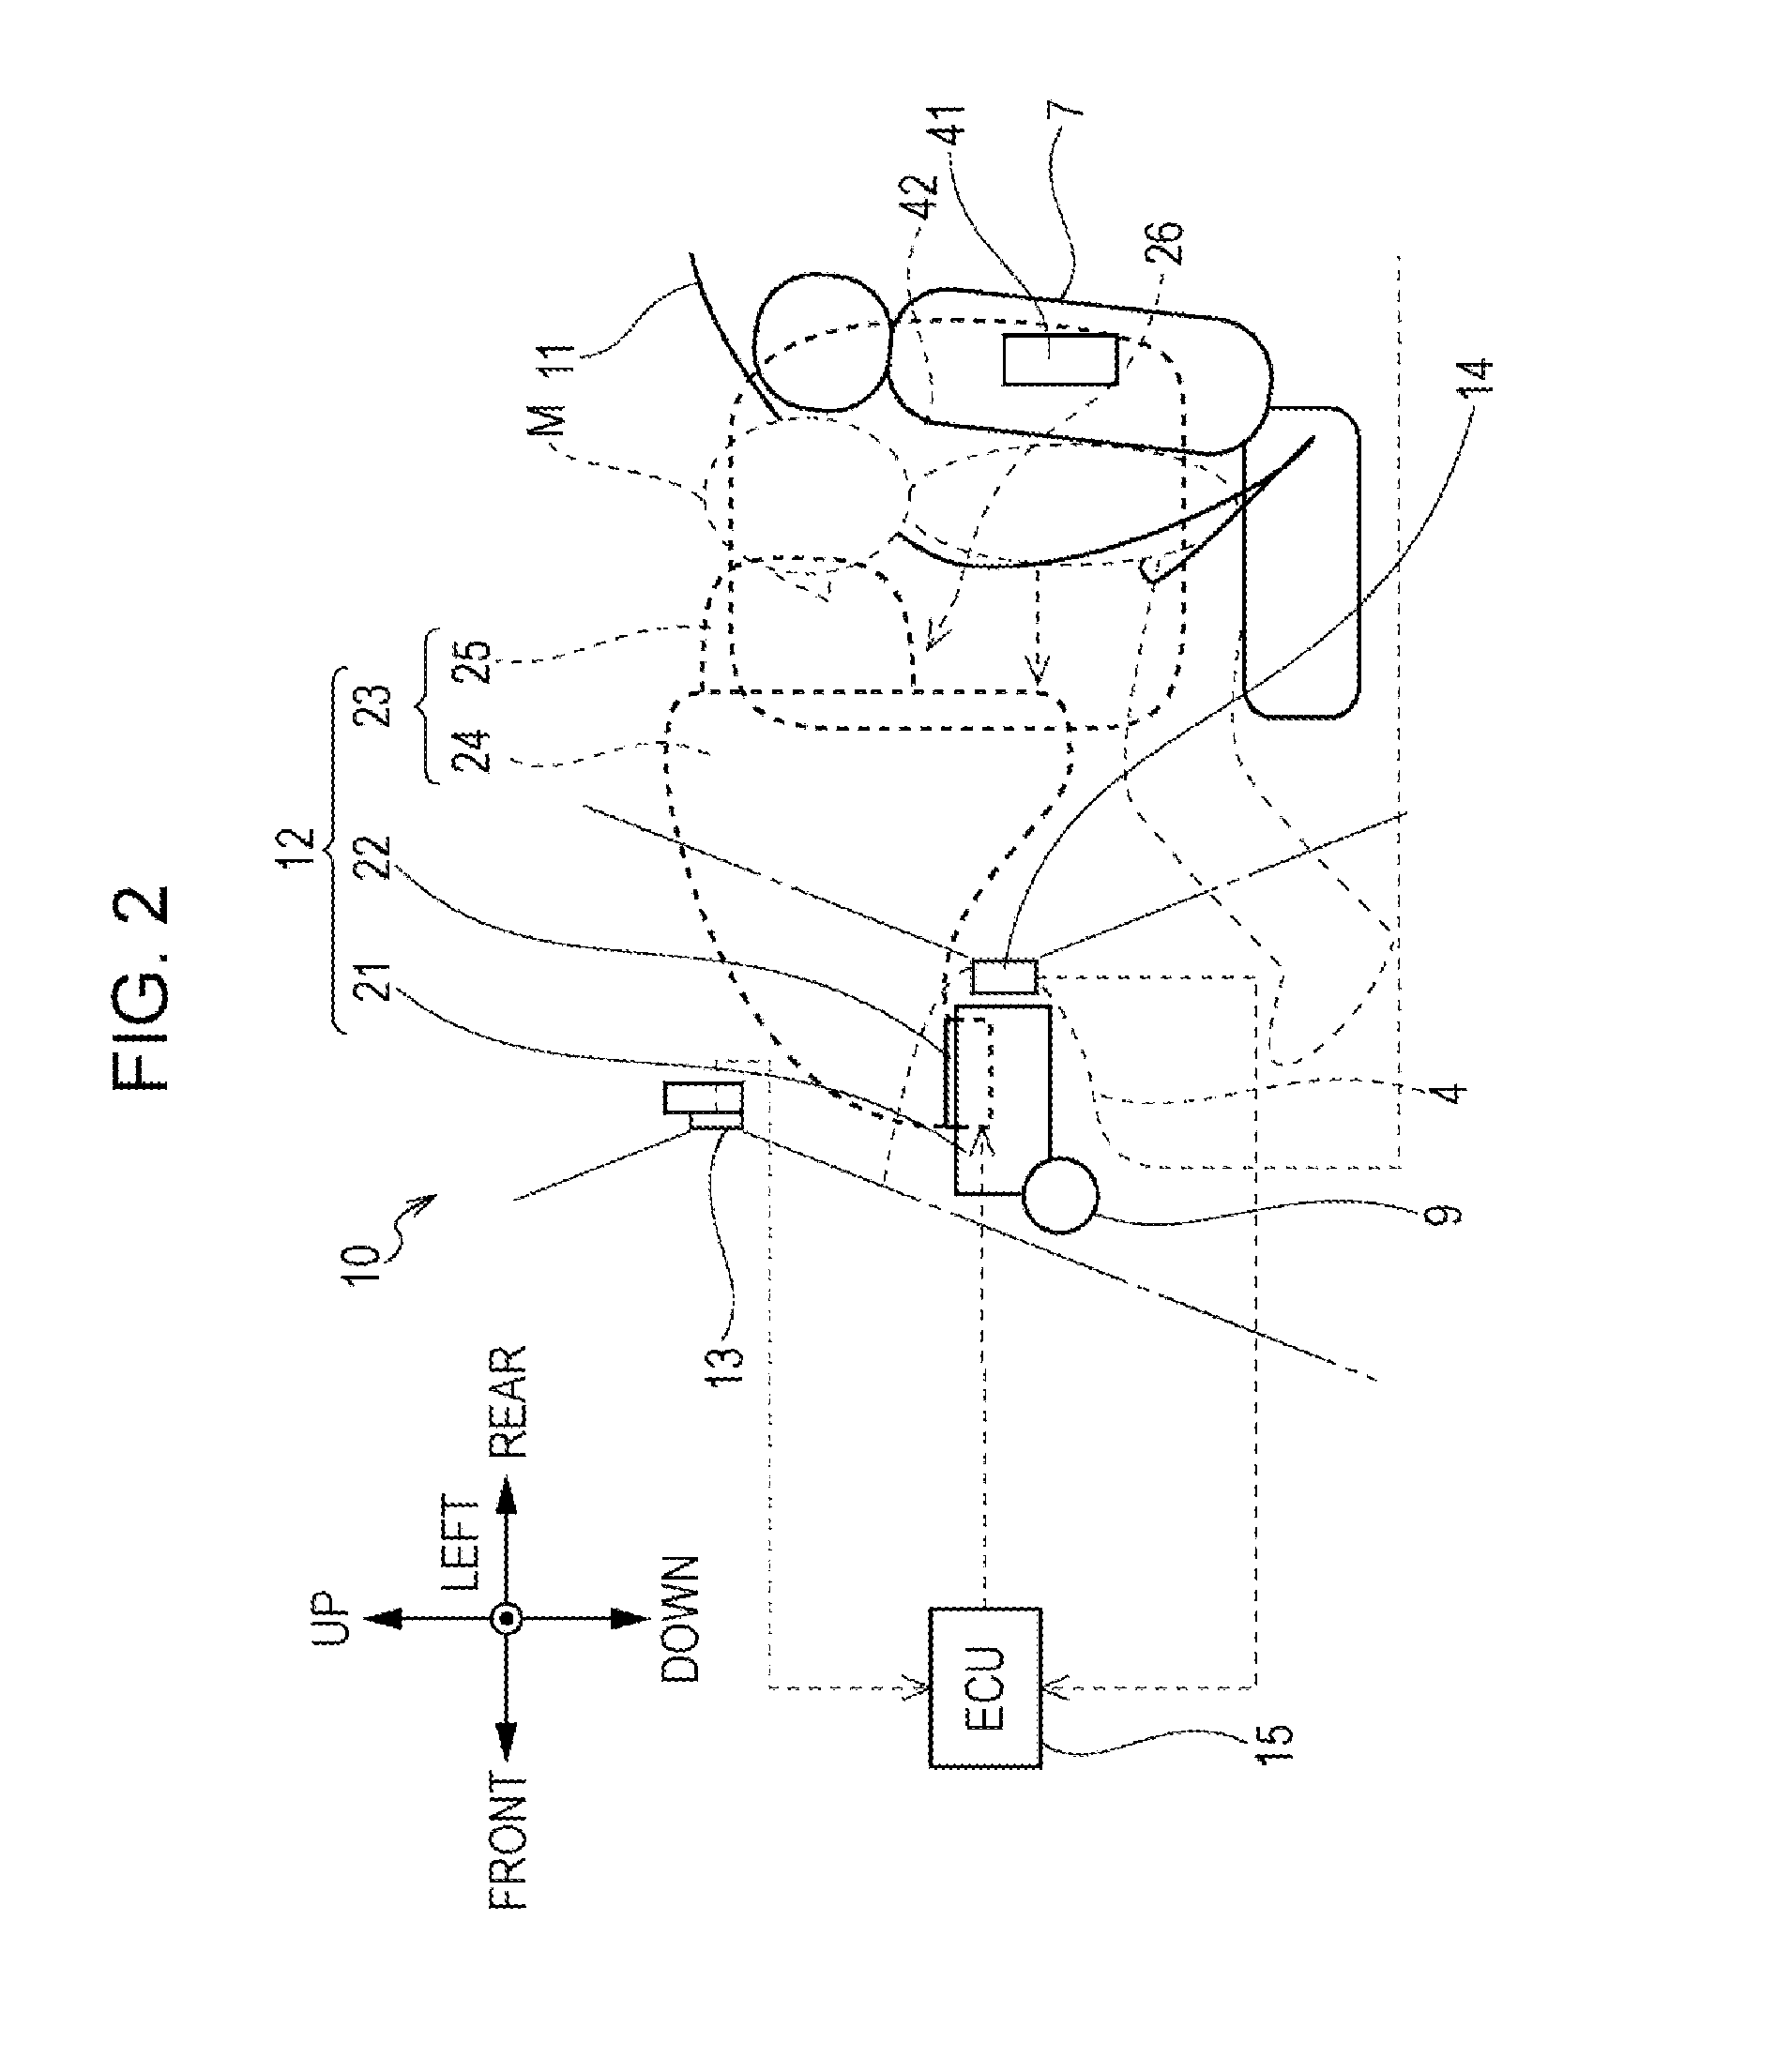 Occupant protection apparatus for vehicle